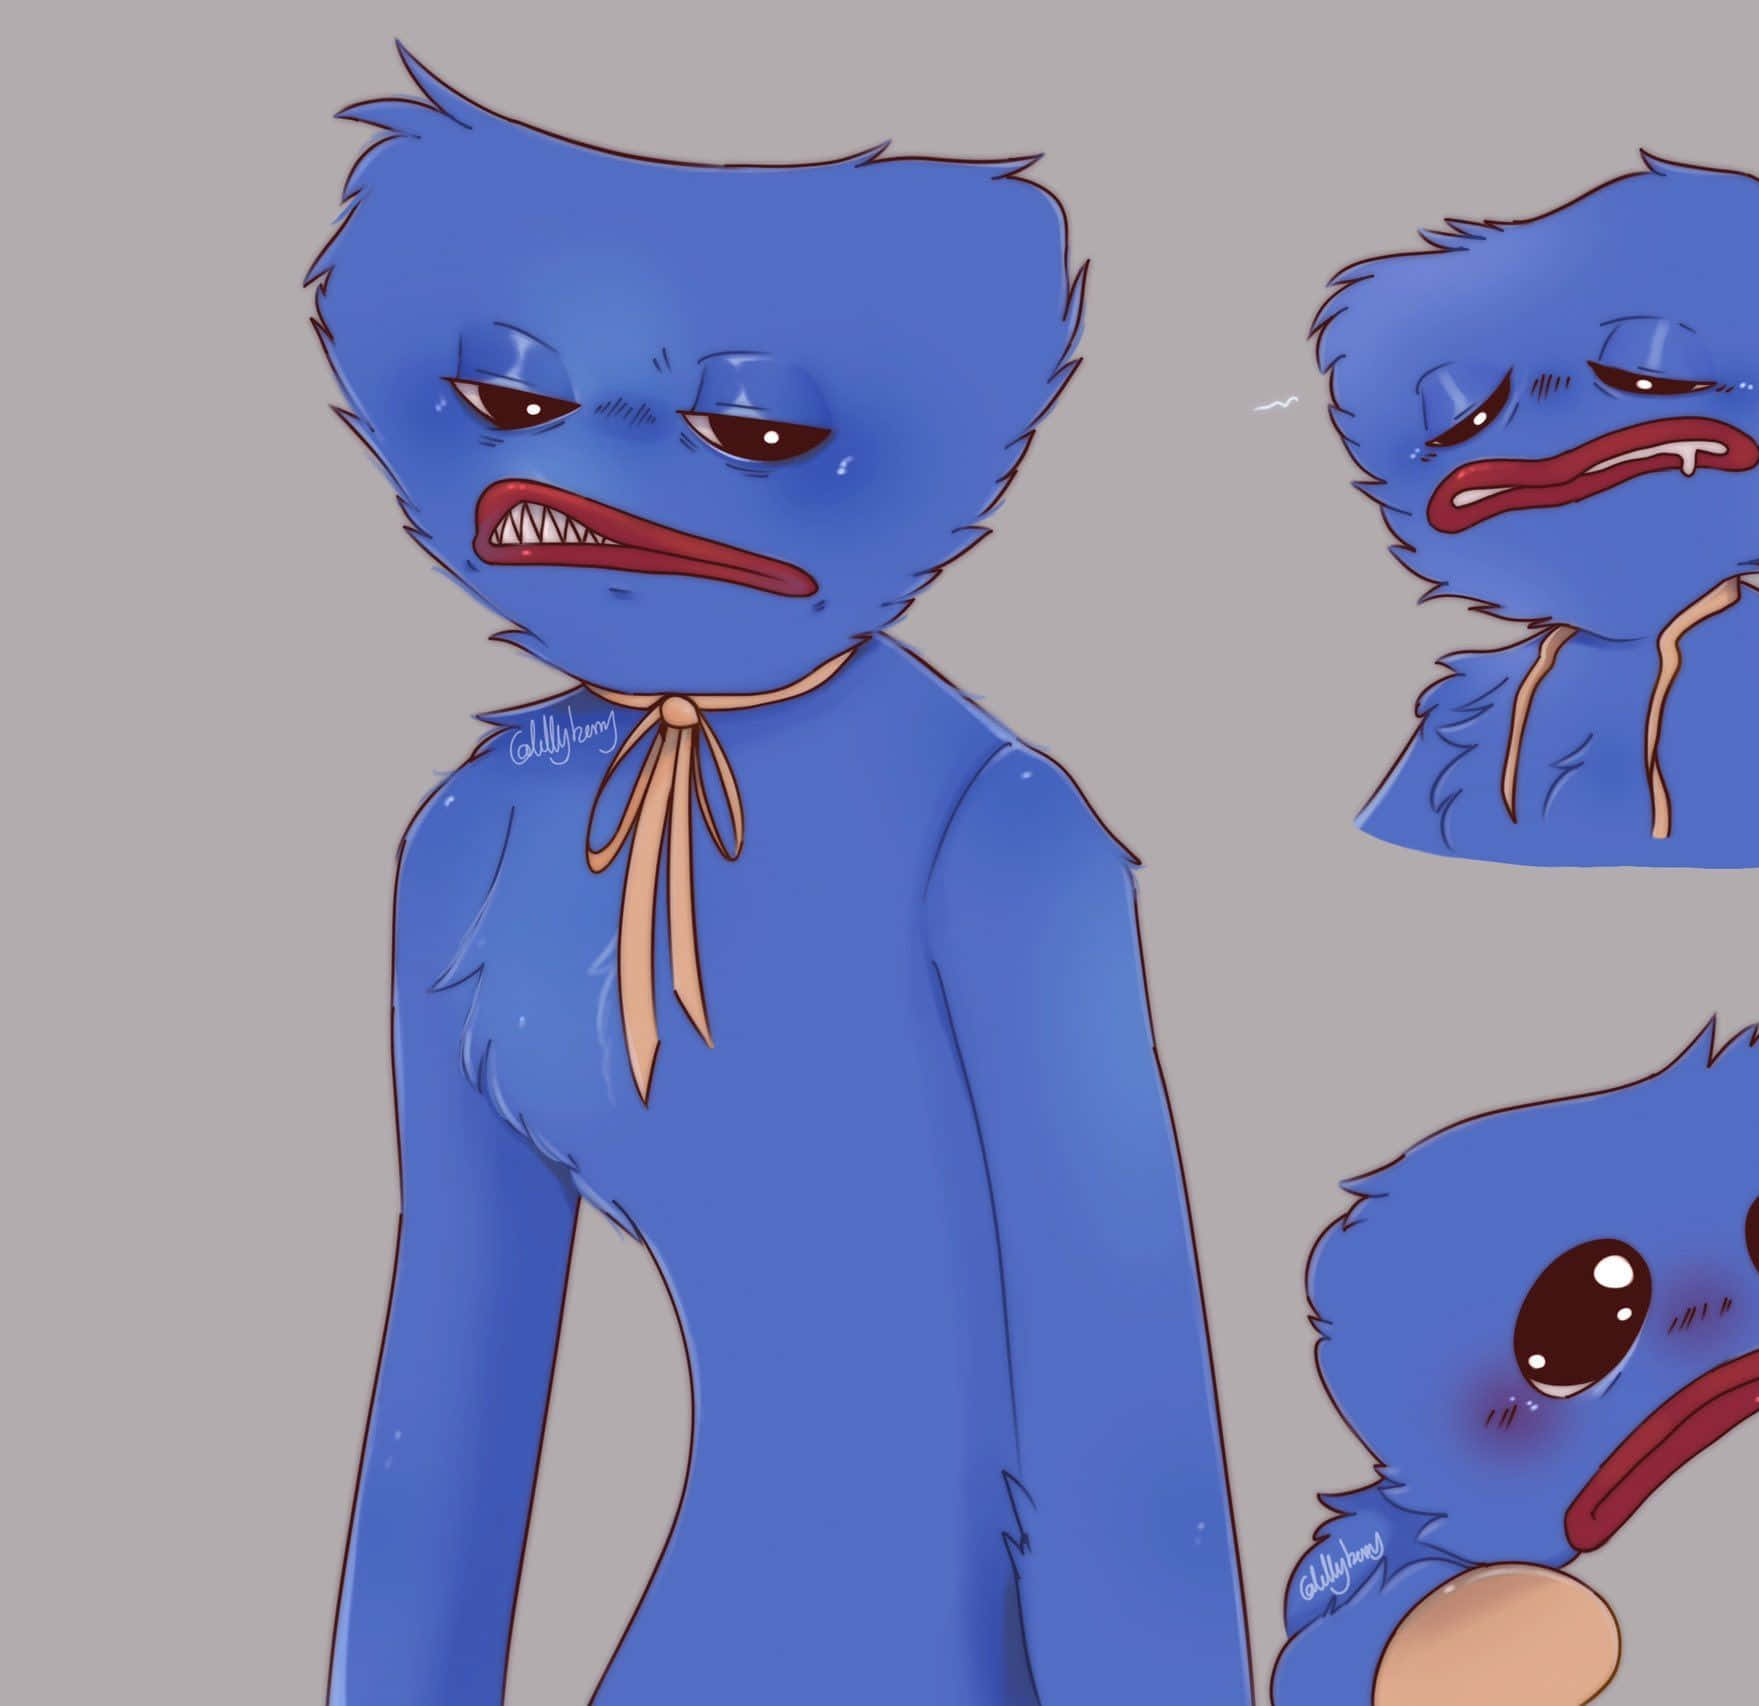 A Blue Creature With Different Expressions